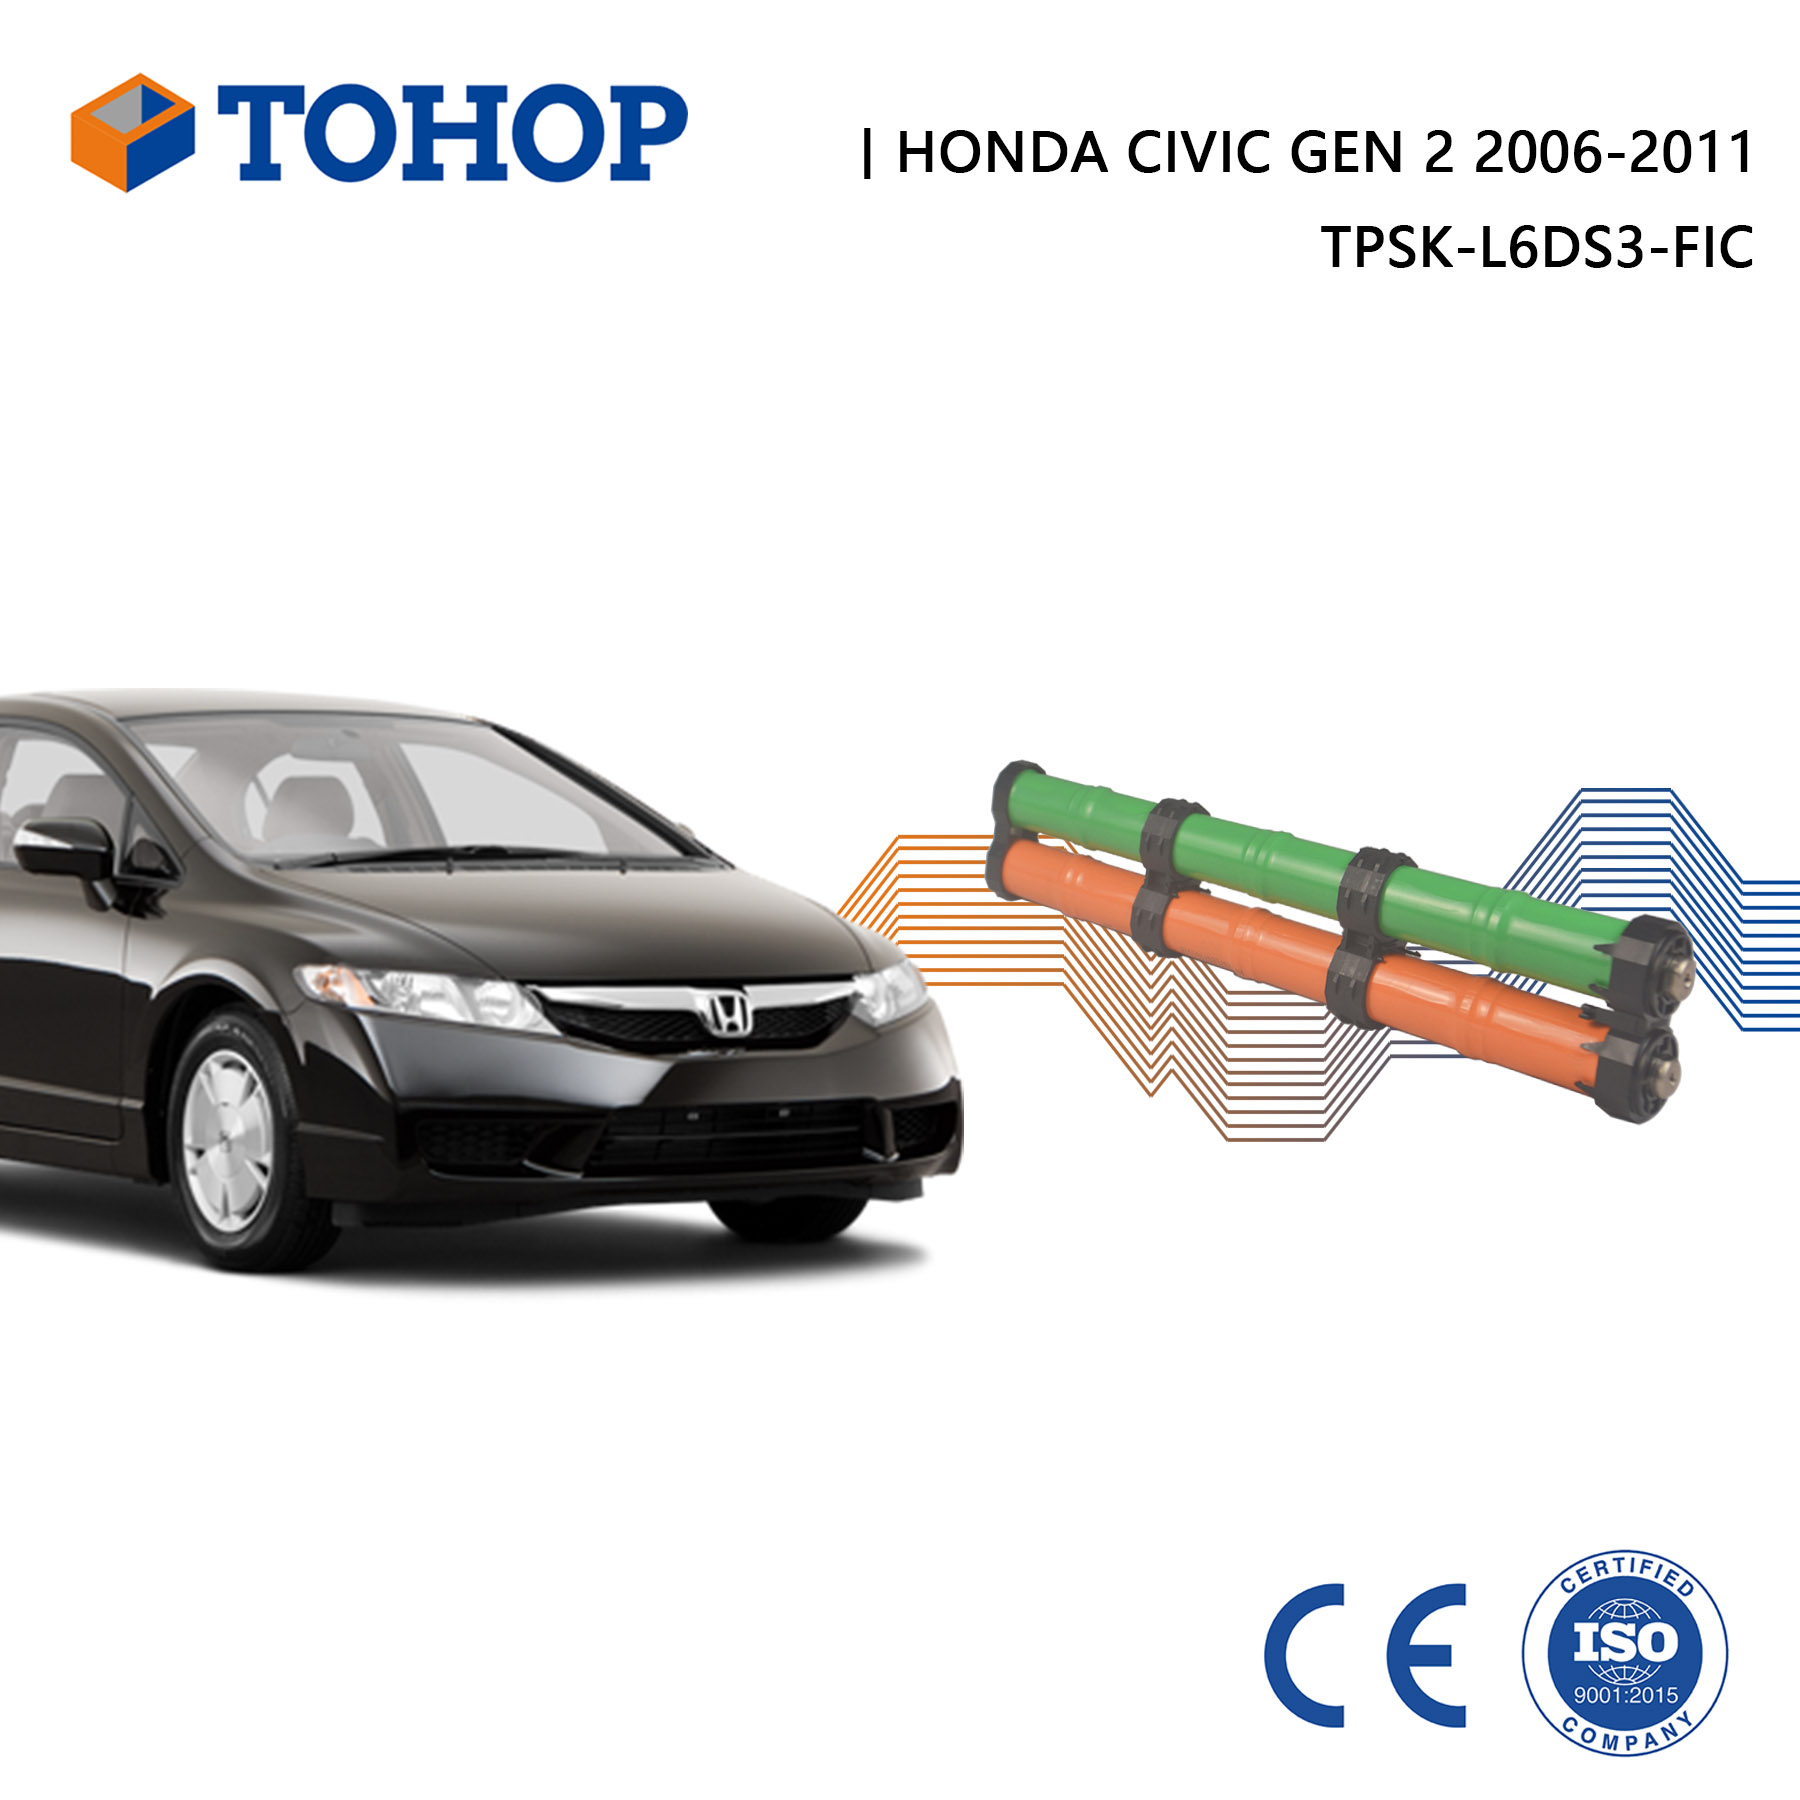 TOHOP Factory Direct Civic 14.4V 6.5Ah Gen.2 Replacement IMA Hybrid Battery Pack